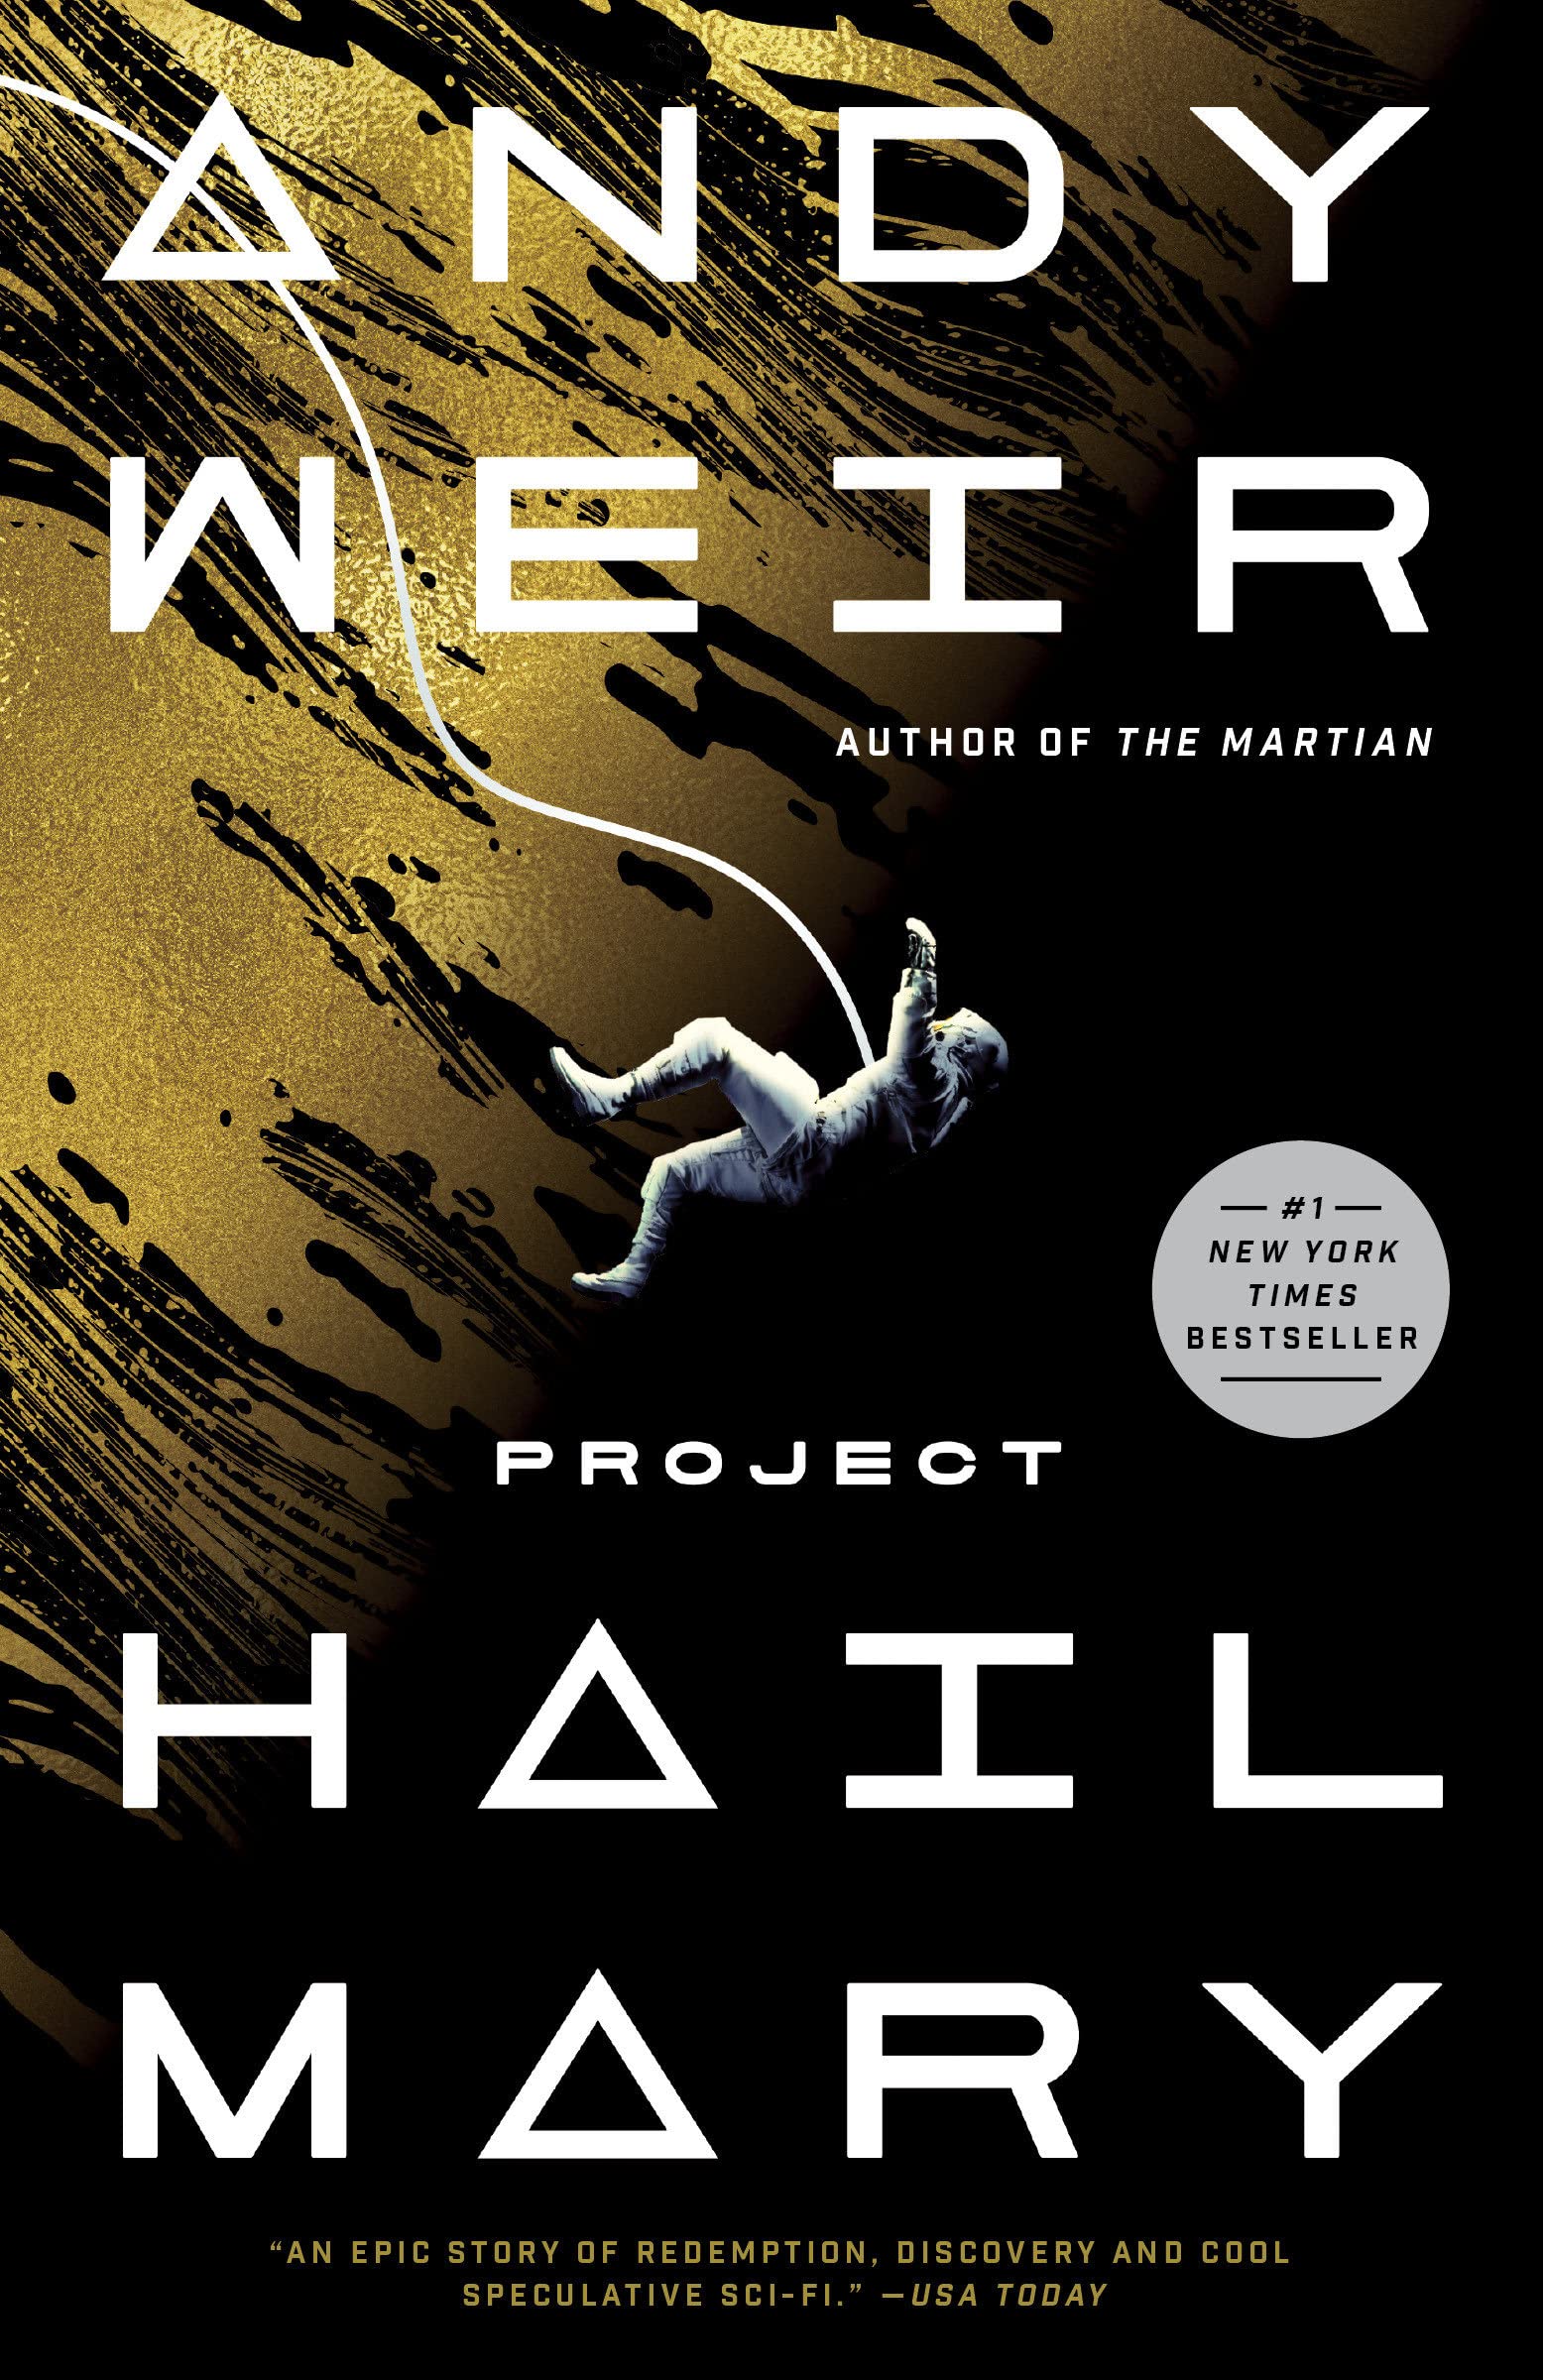 Book Cover of Project Hail Mary by Andy Weir